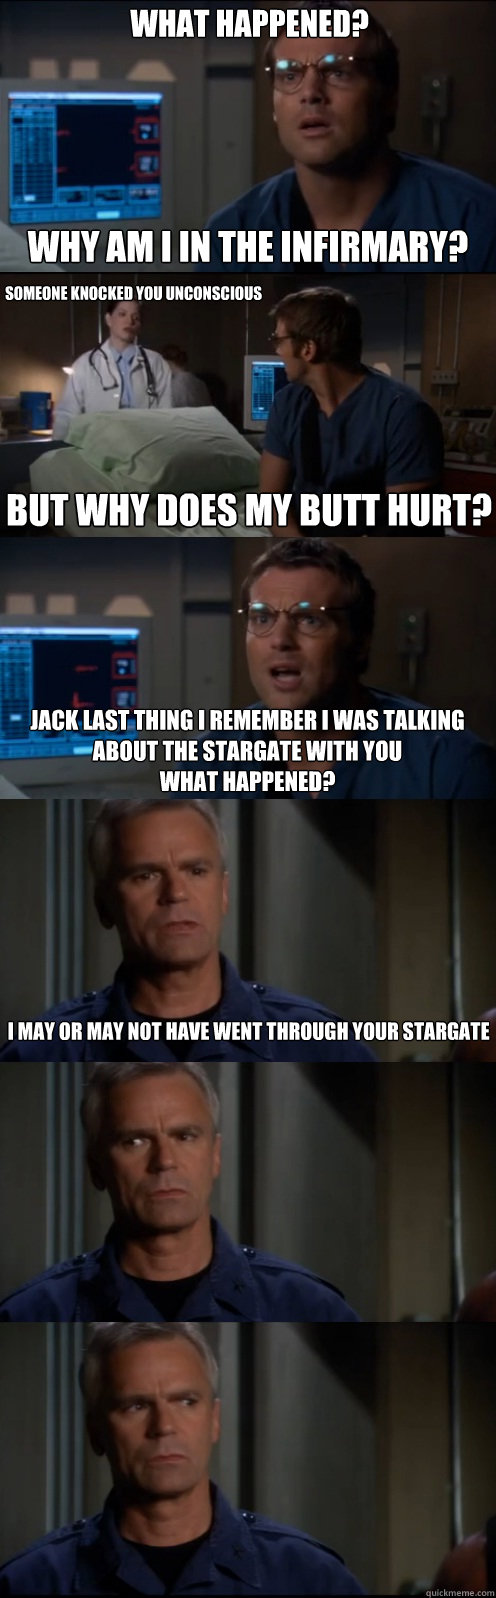 What Happened?  Why am I in the infirmary? Someone knocked you unconscious But why does my butt hurt? Jack last thing I remember I was talking about the stargate with you
What happened? I may or may not have went through your stargate  